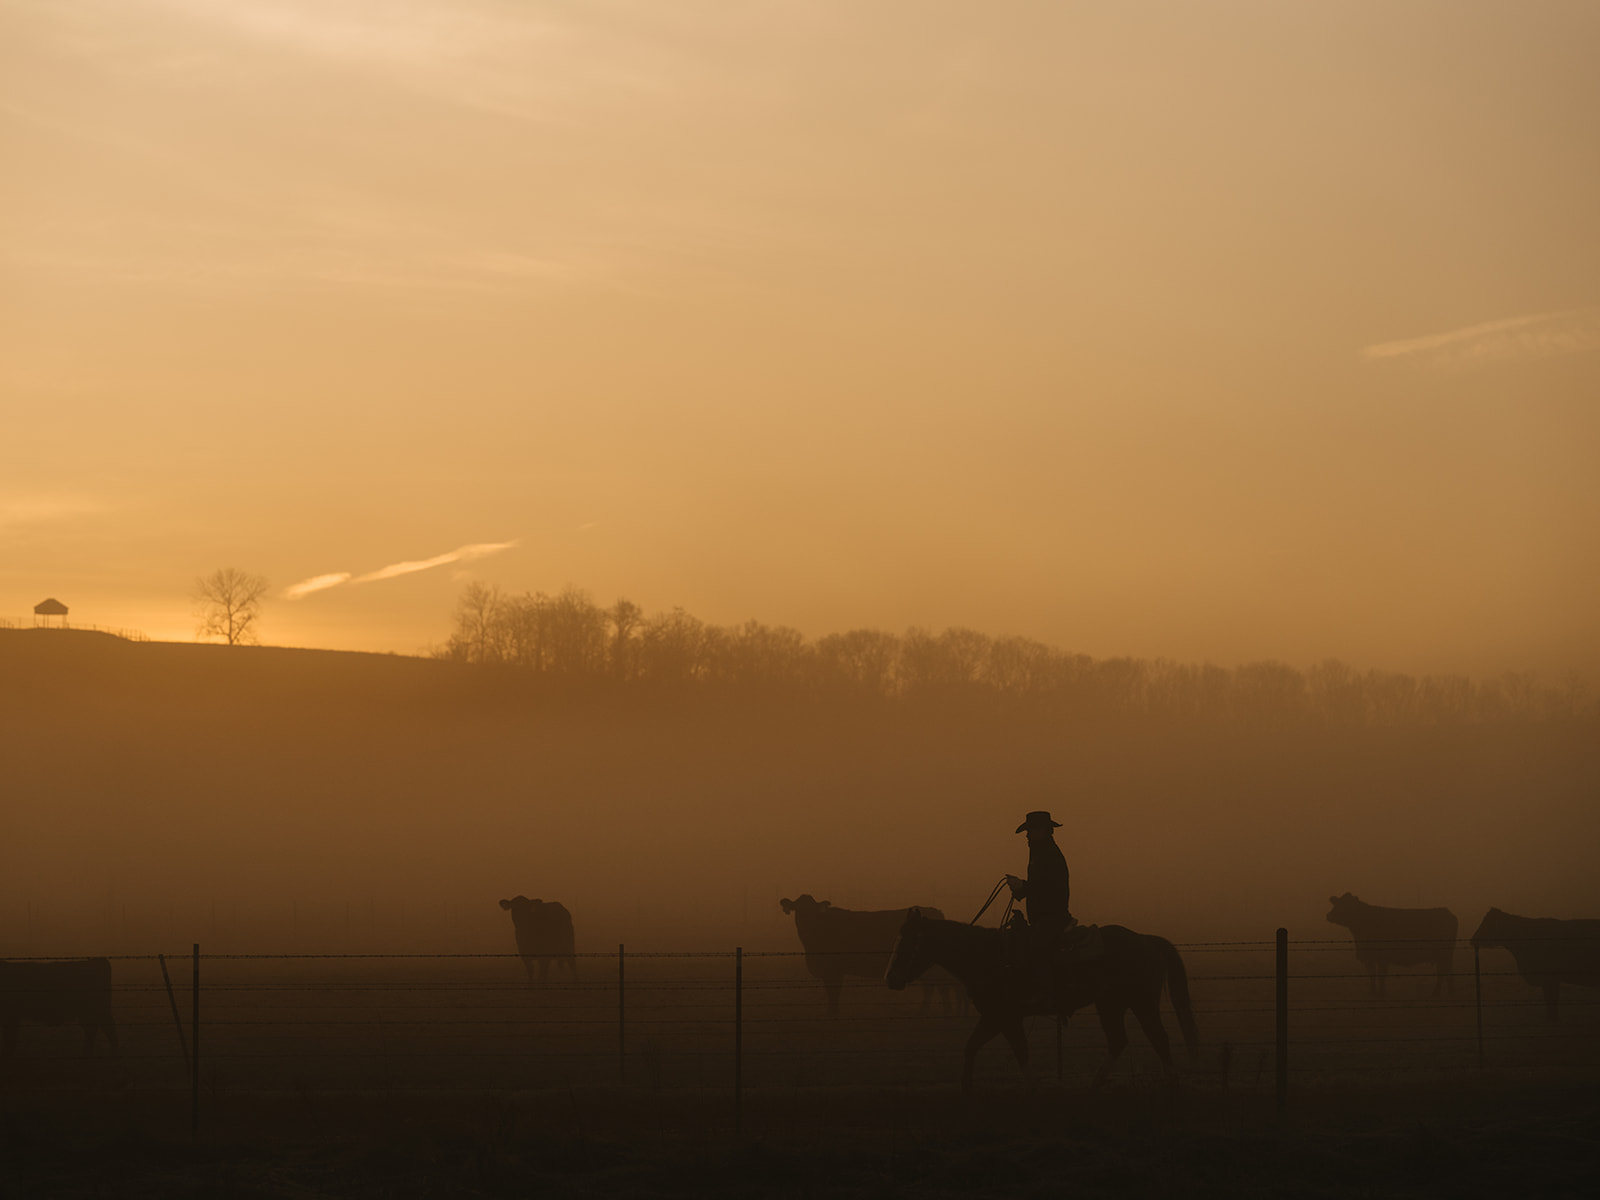 sunrise cattle work, cowboys in Missouri at the 808 ranch